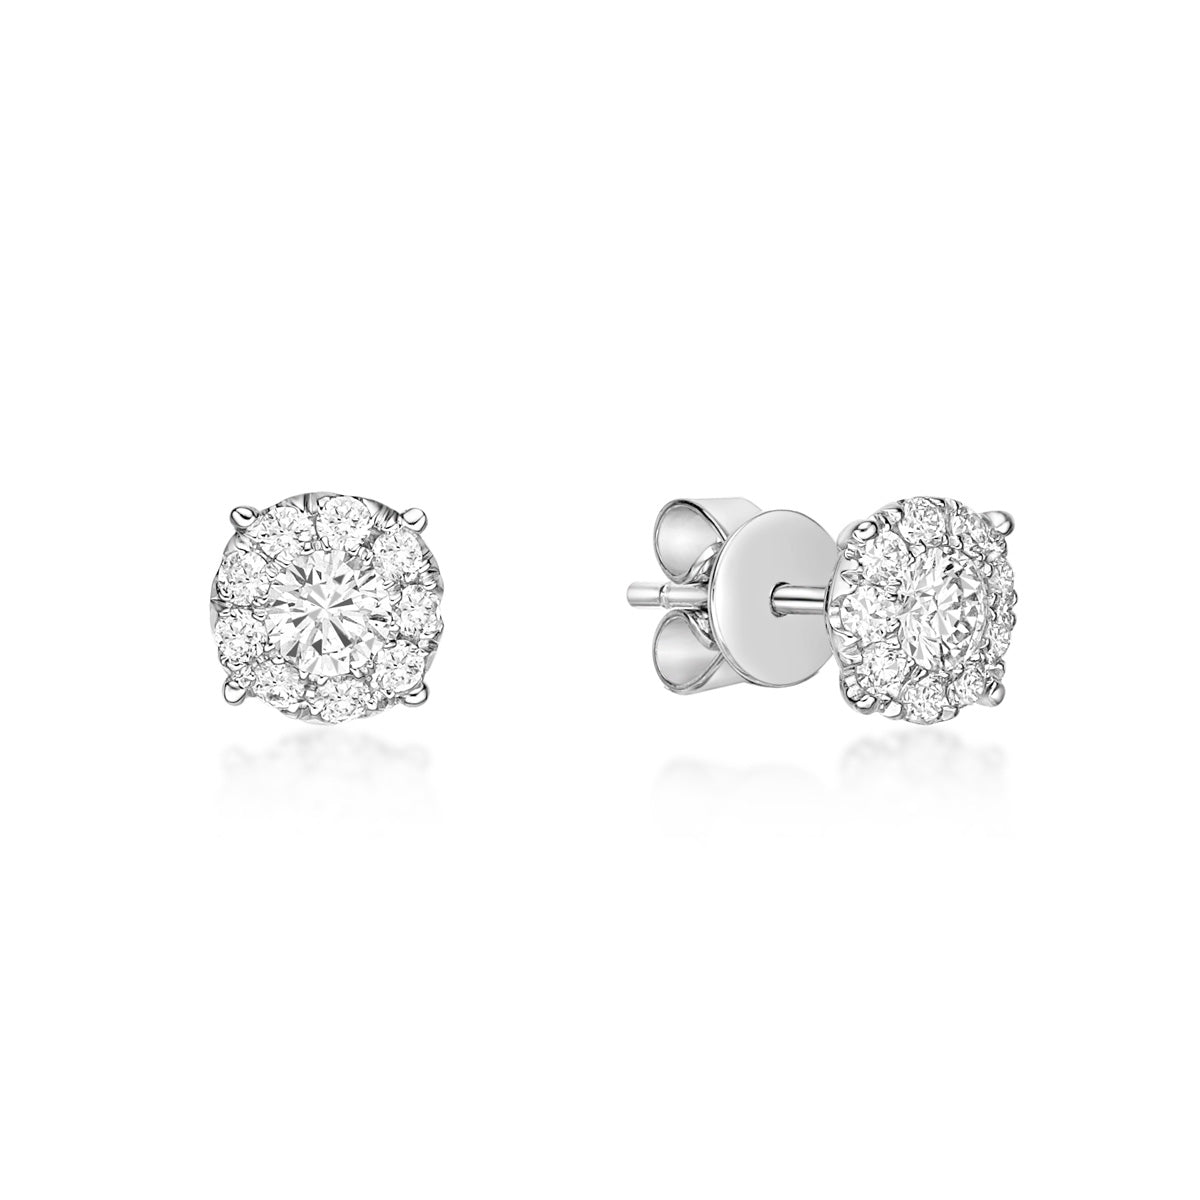 1ct Face-value Illusion Studs in 18K White Gold